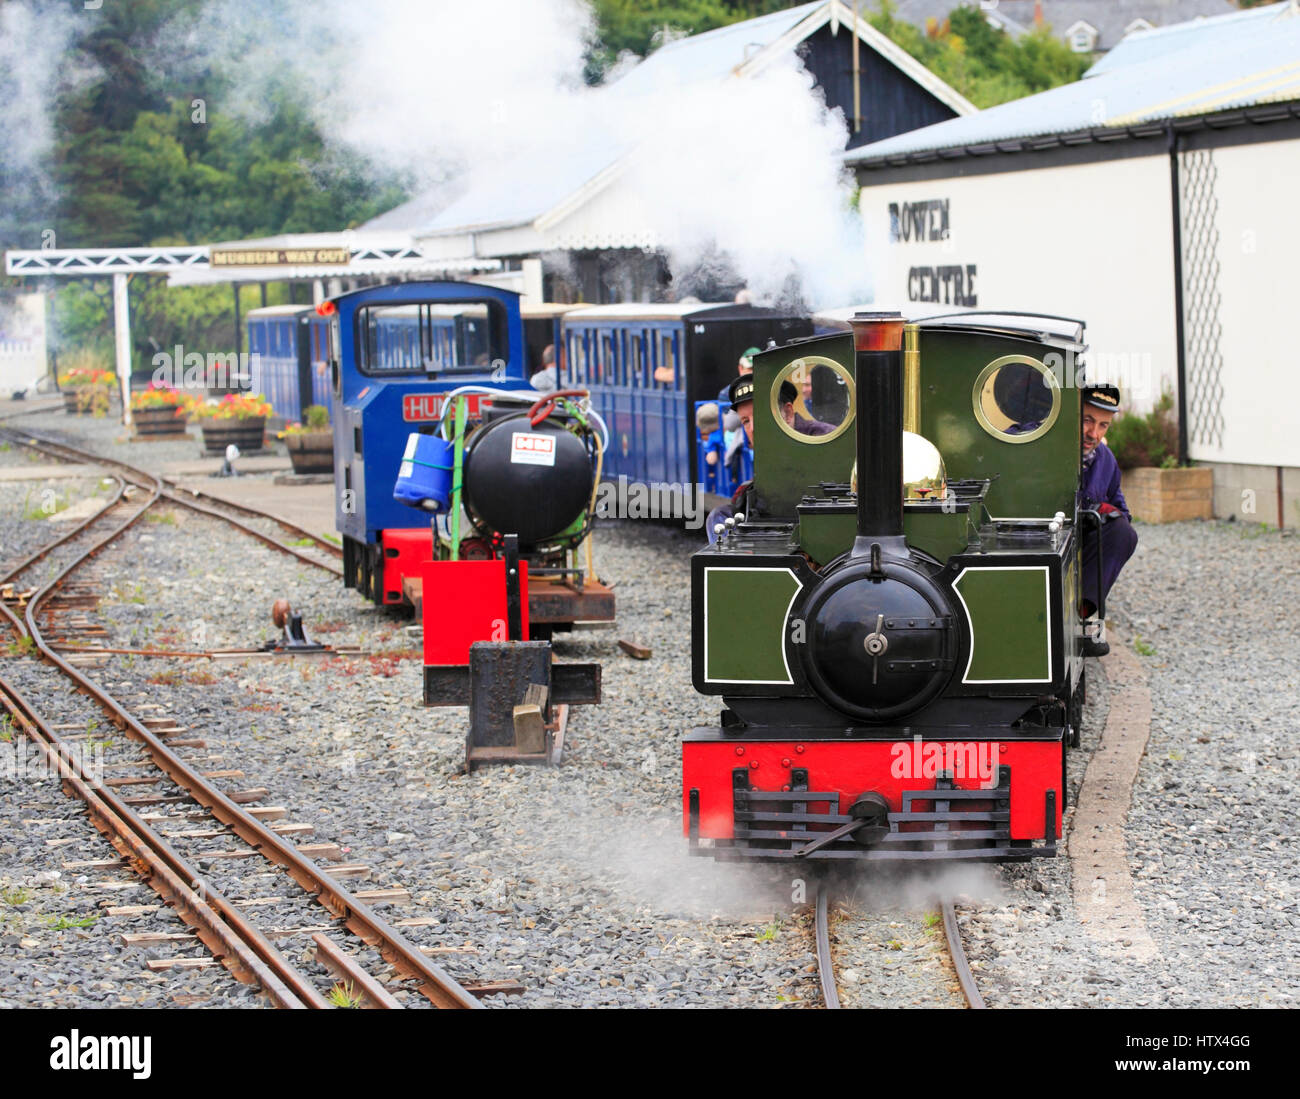 'Yeo' a 2-6-2 tank locomotive based on the Lynton and Barnstaple Class Engine leaves Fairbourne station, Fairbourne Railway, Fairbourne, Wales, Europe Stock Photo